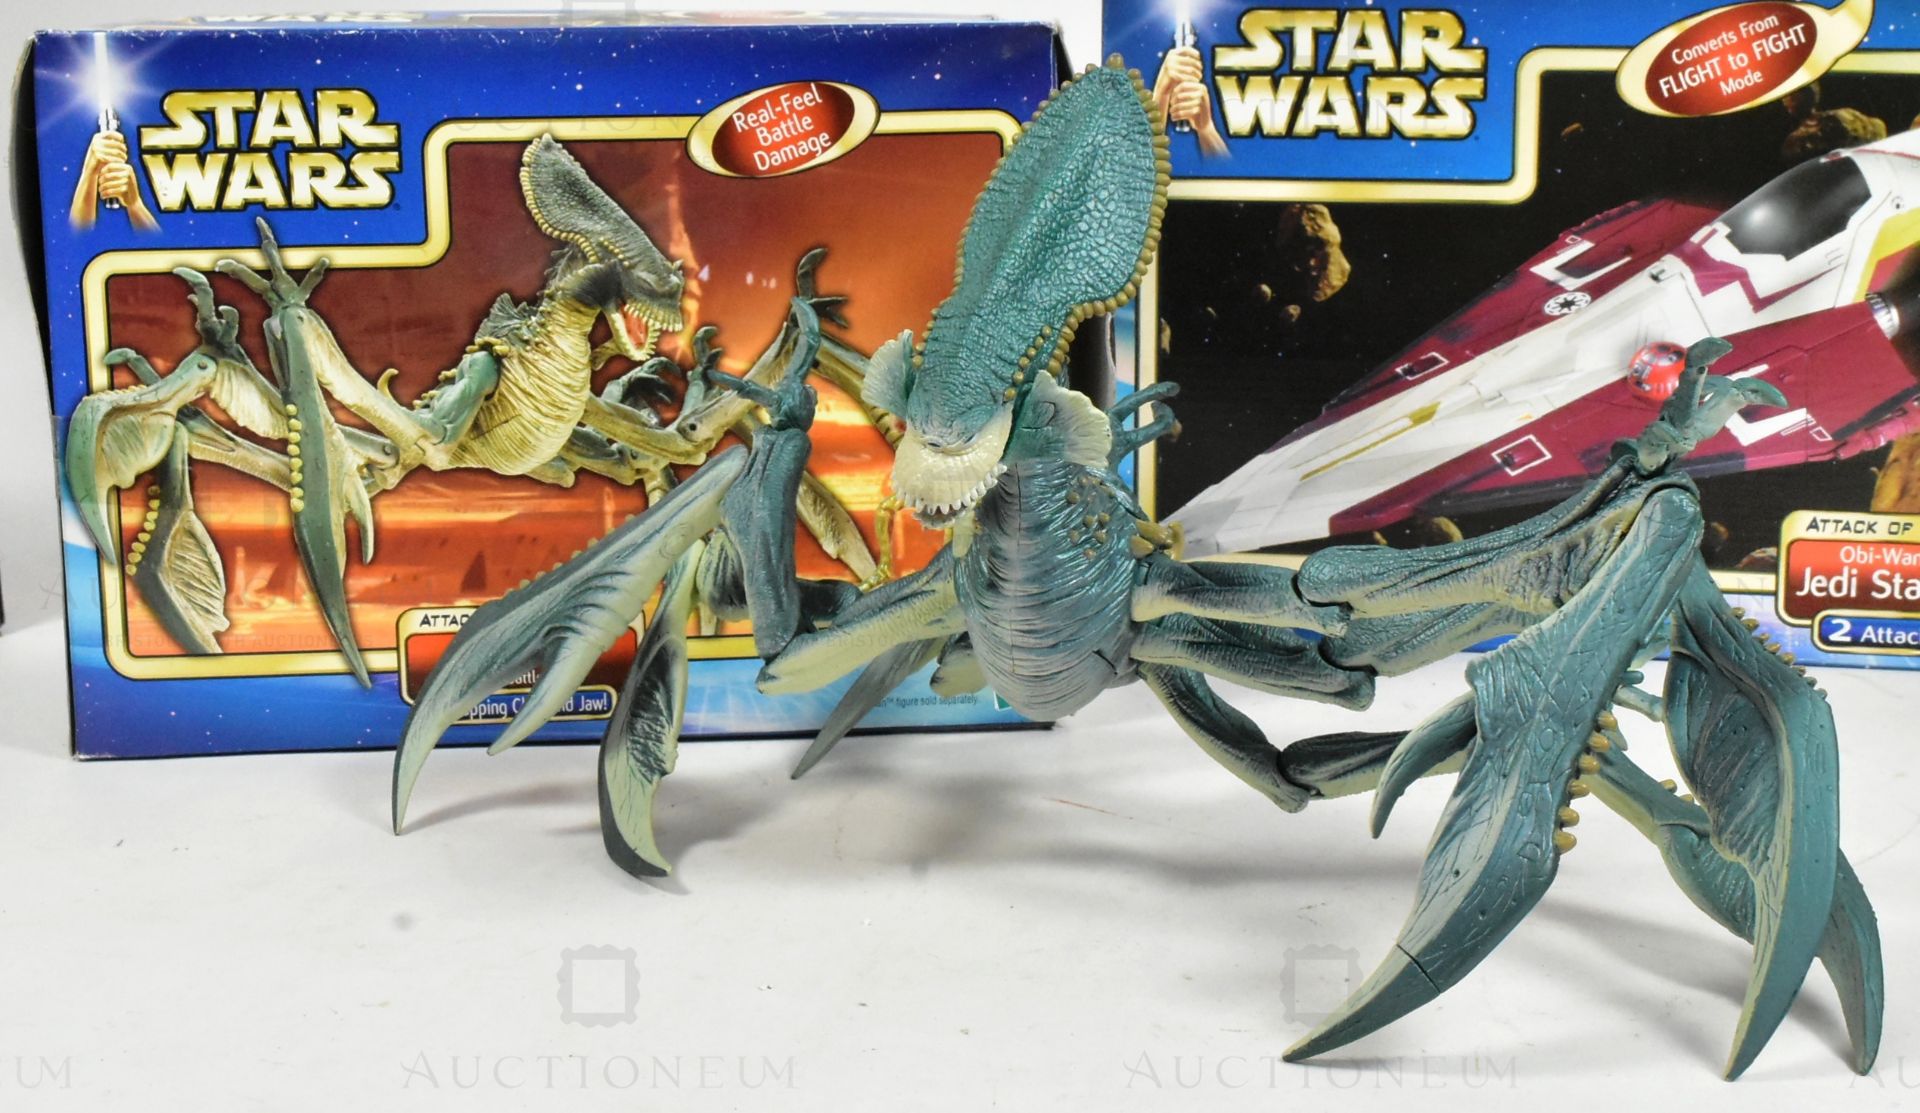 STAR WARS - ATTACK OF THE CLONES - ACTION FIGURE PLAYSETS - Image 4 of 4